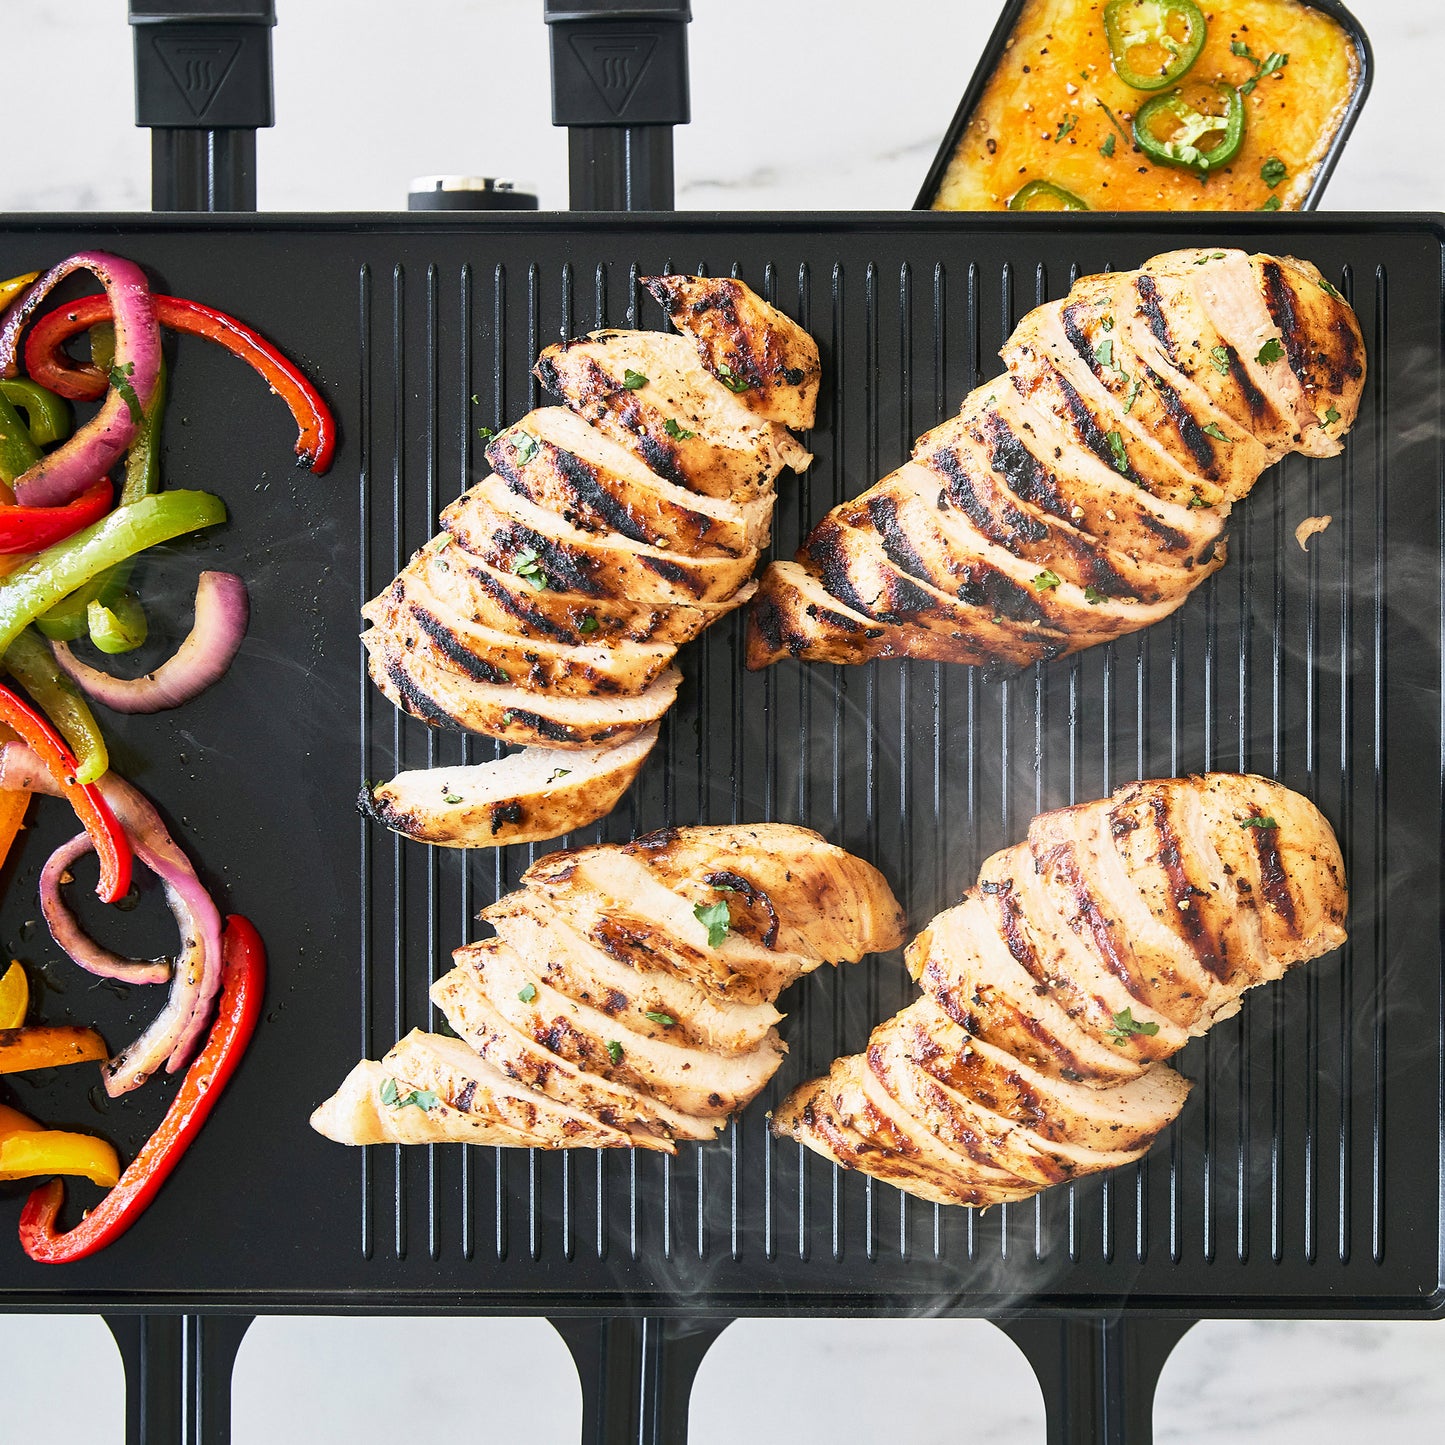 Premium Greenpan Gourmet Grill for Ultimate Culinary Experience